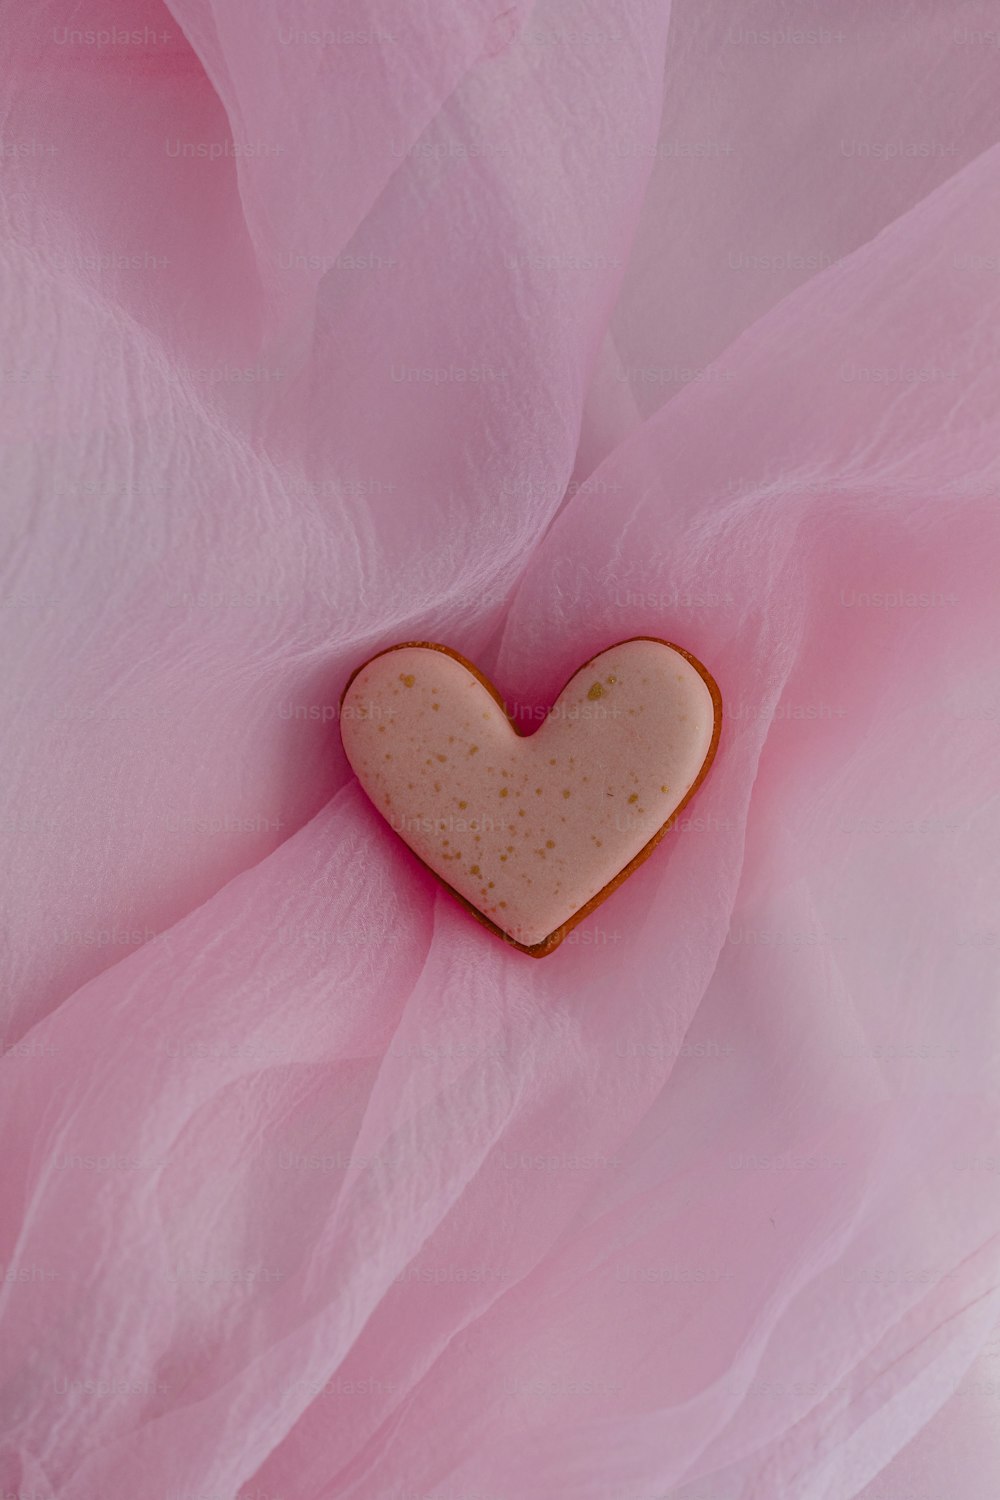 A heart shaped cookie sitting on top of a pink cloth photo